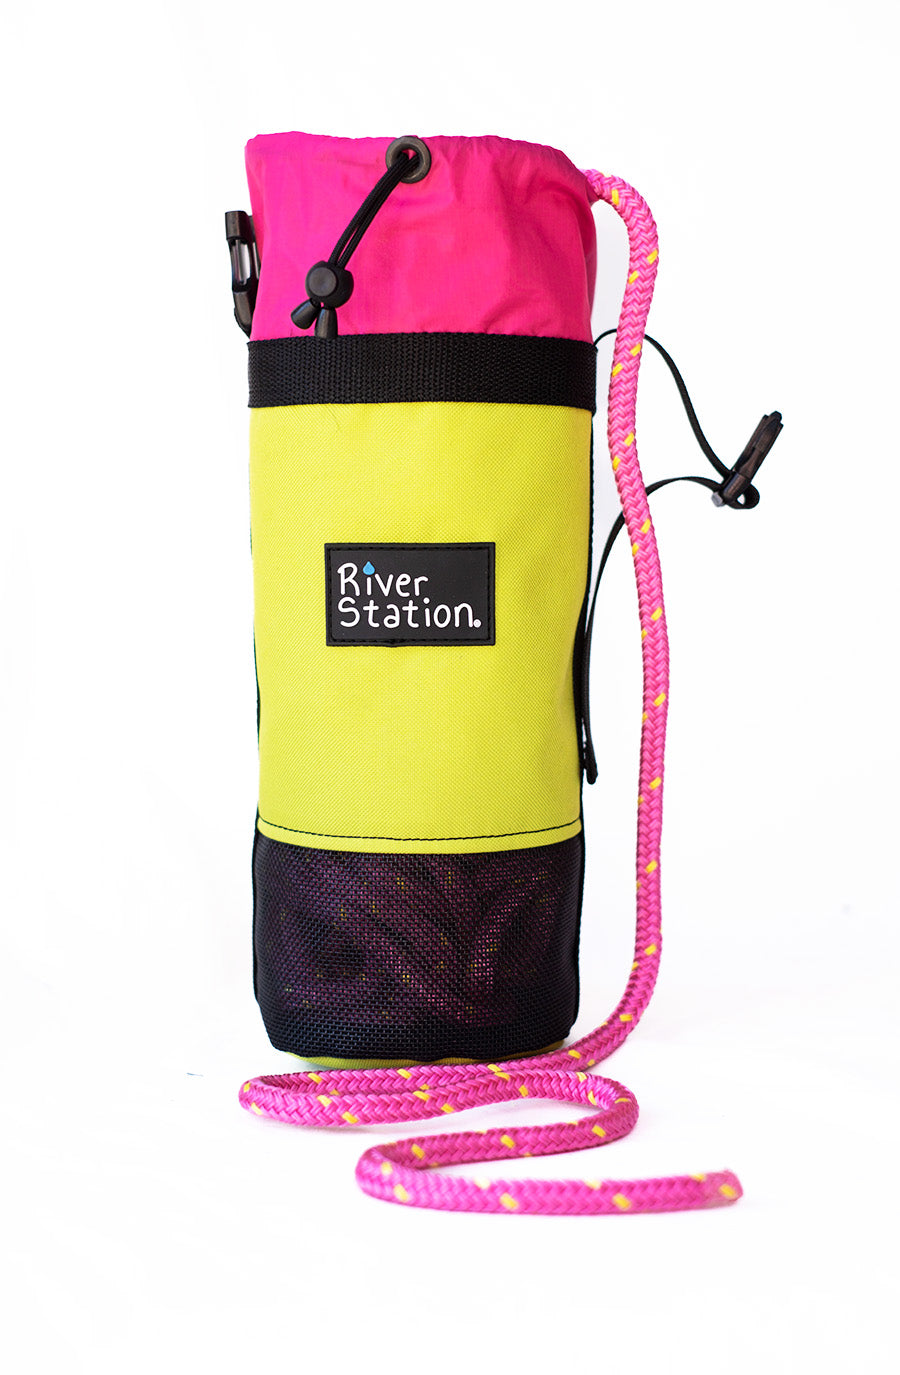 best pink bright throw bag for whitewater rescue